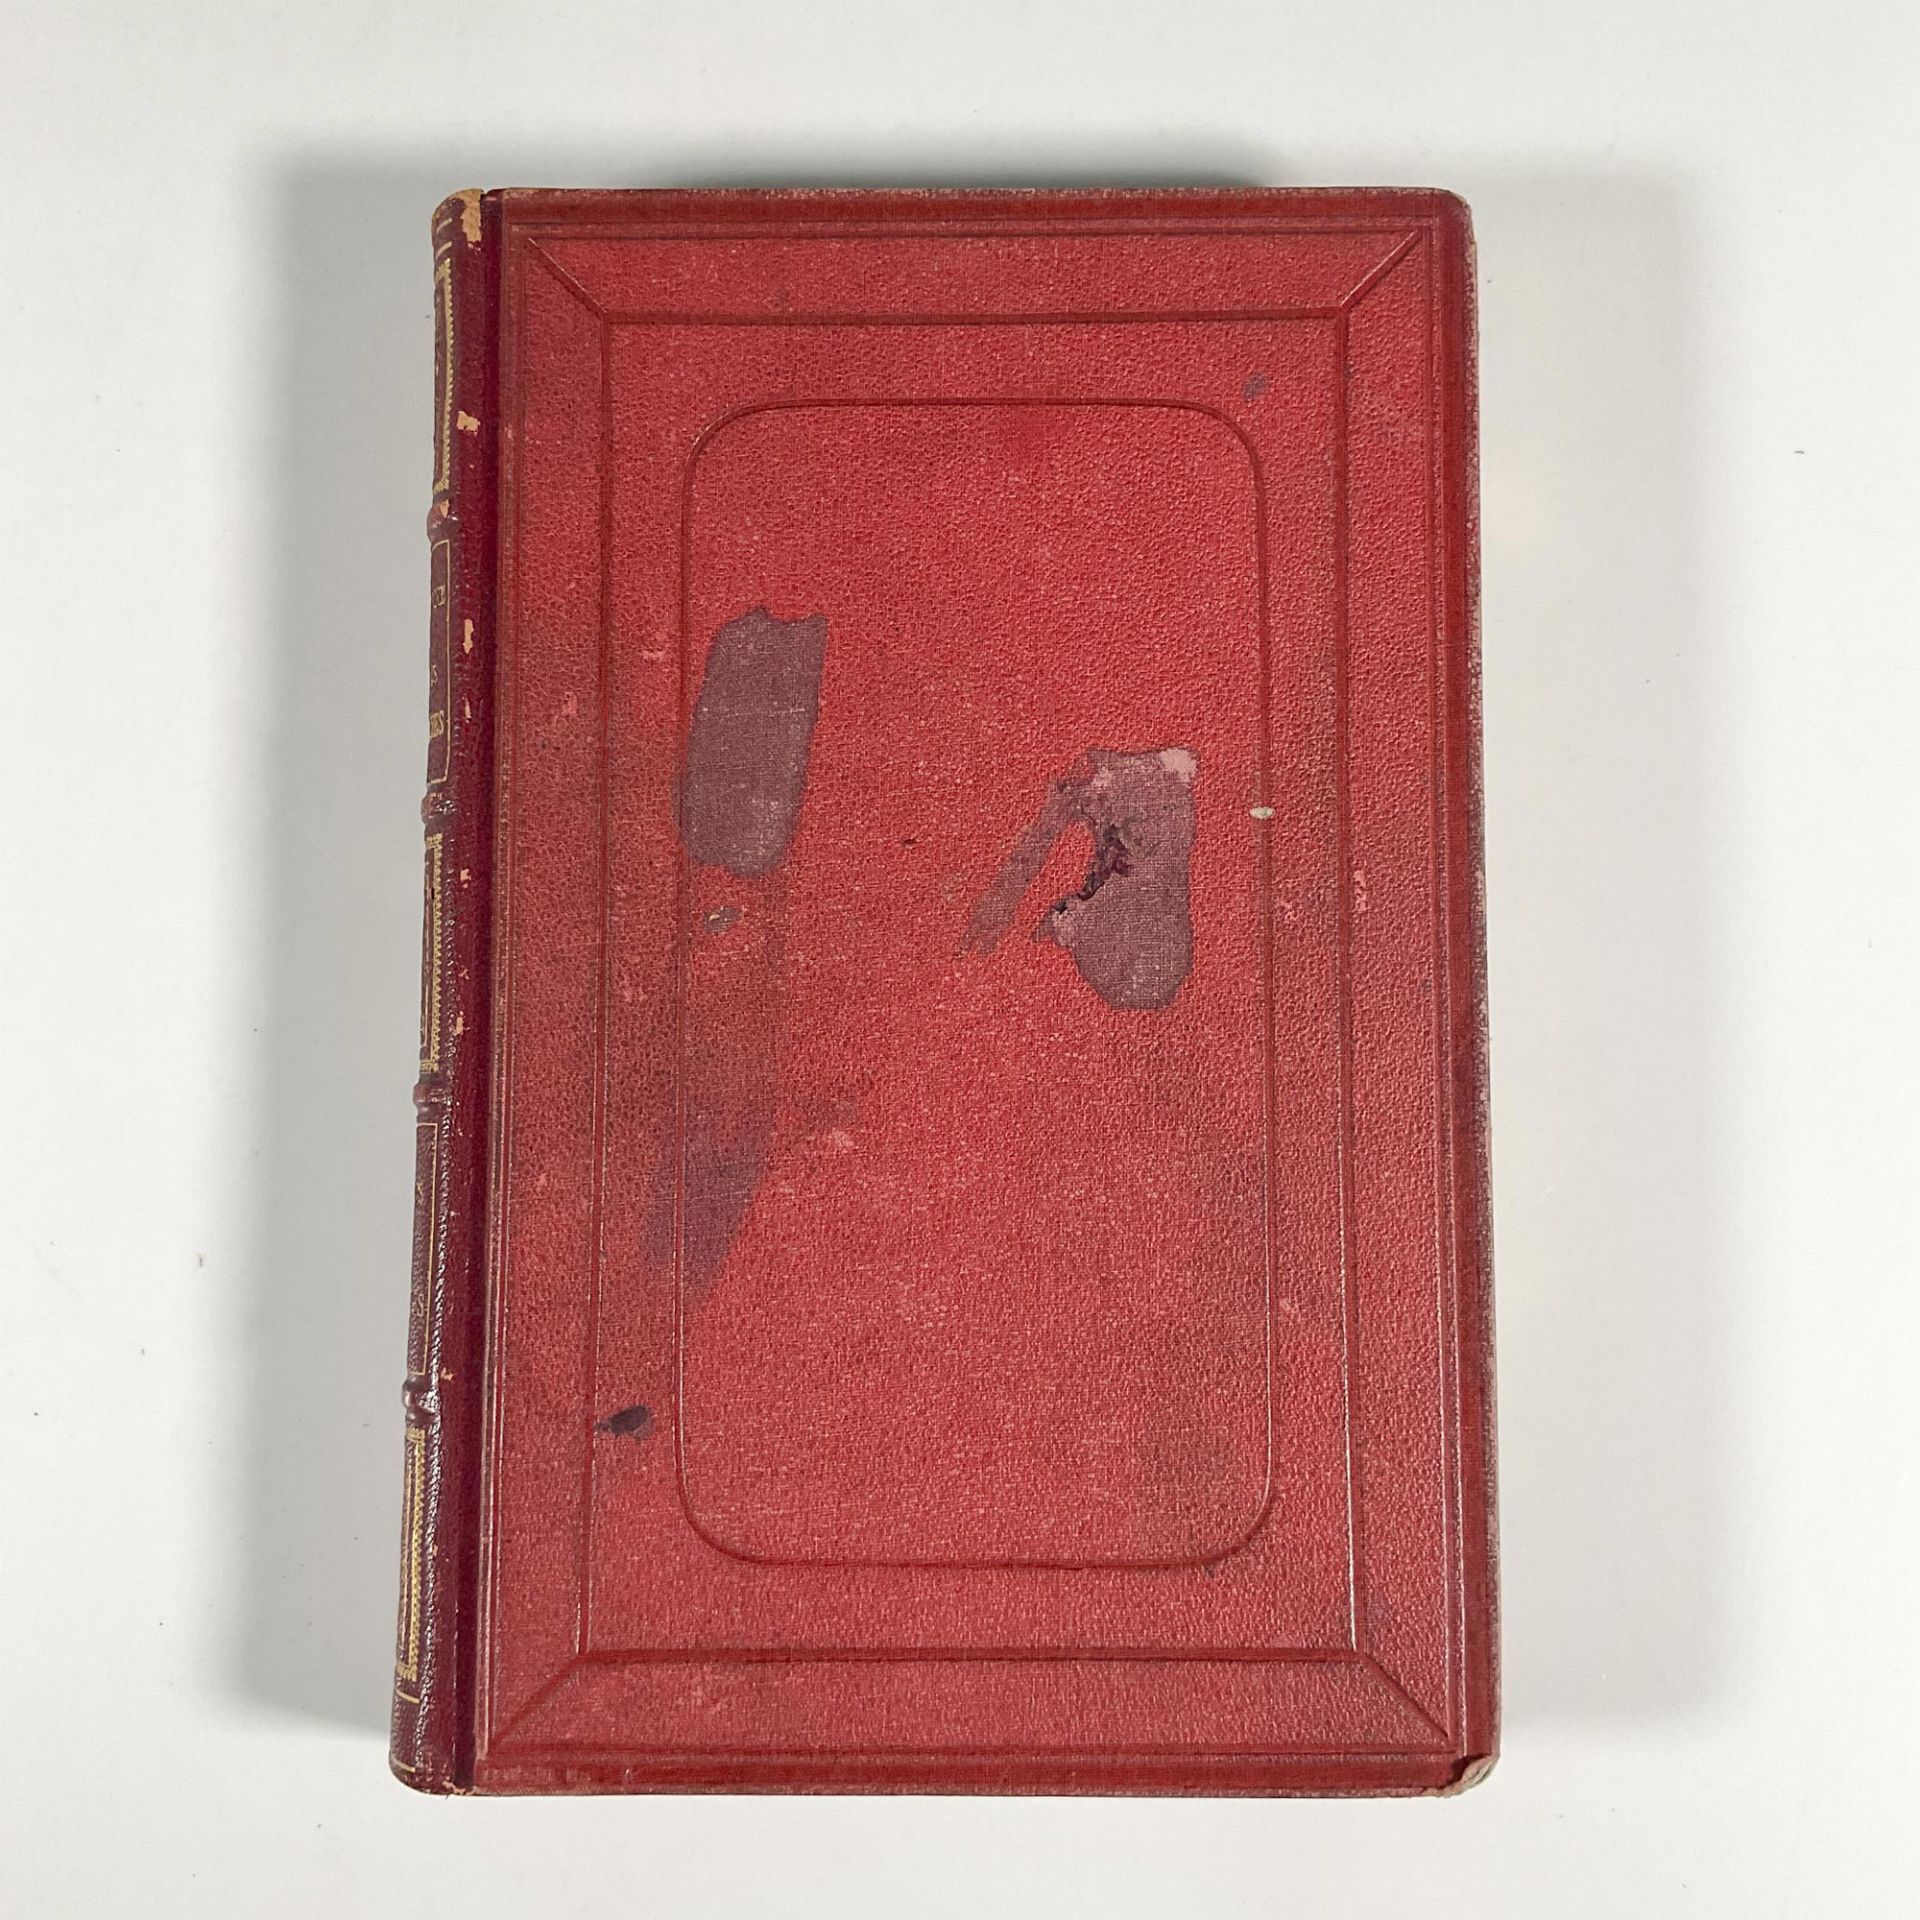 Jules Verne, Le Pays des Fourrures, Aux Harpons, Red Cover - Image 2 of 4